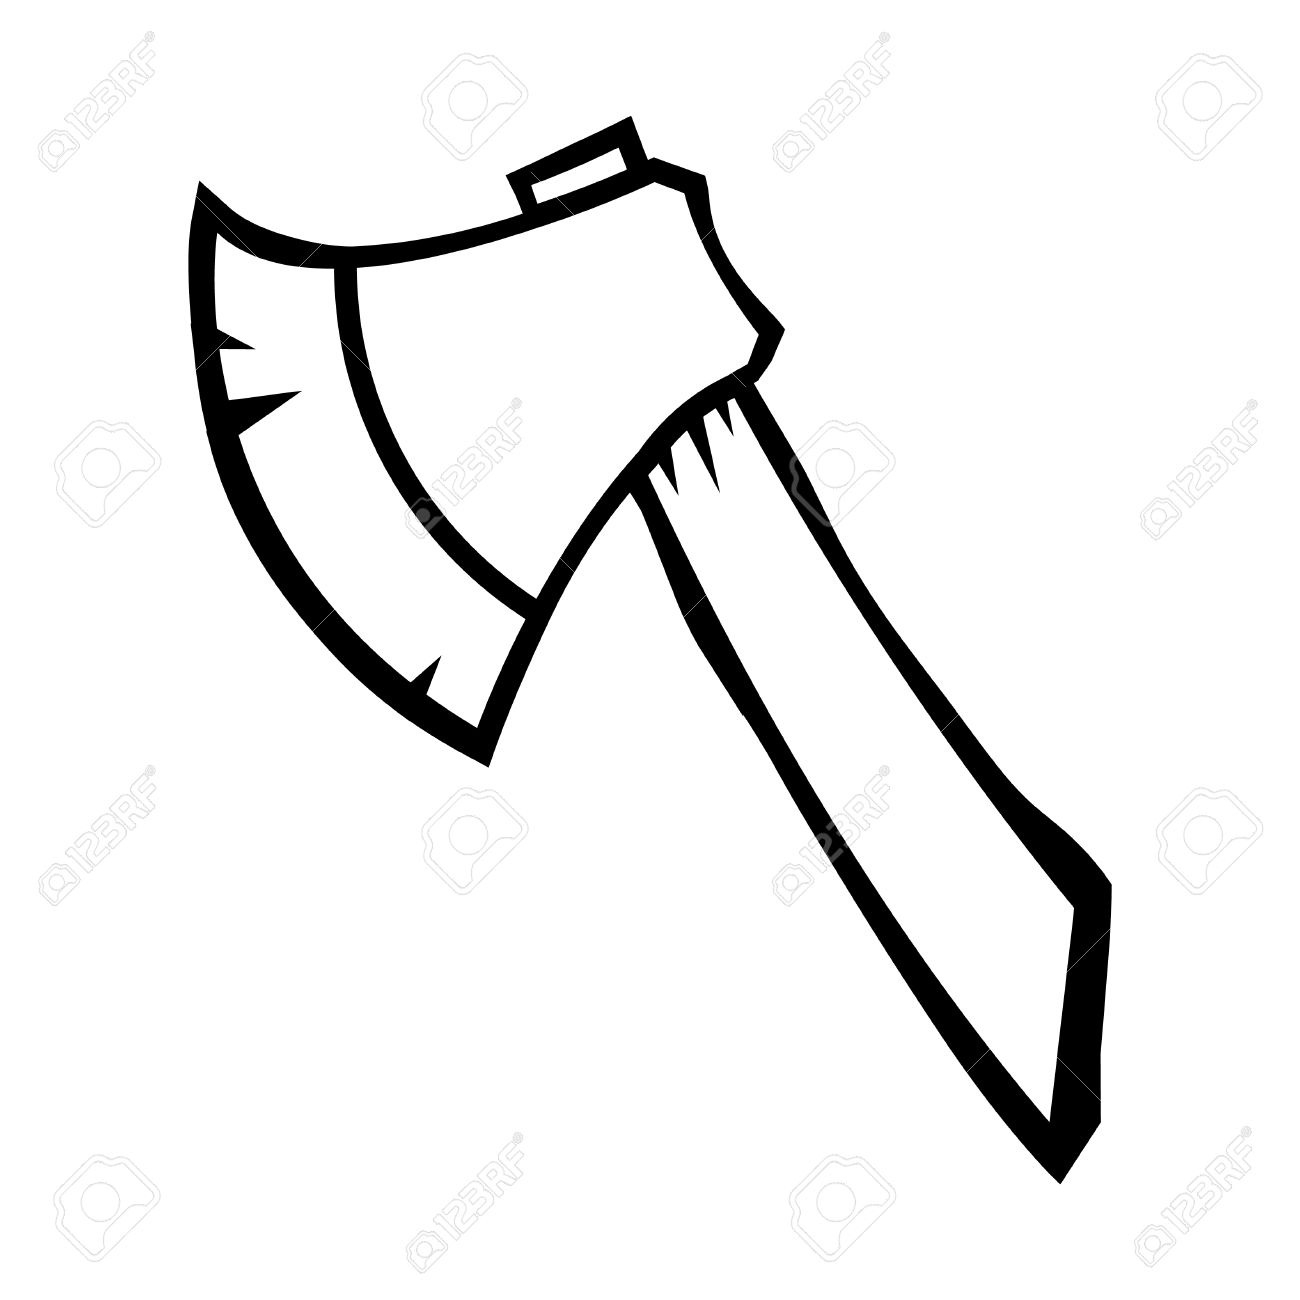 Ax letters. Axe clipart black and white